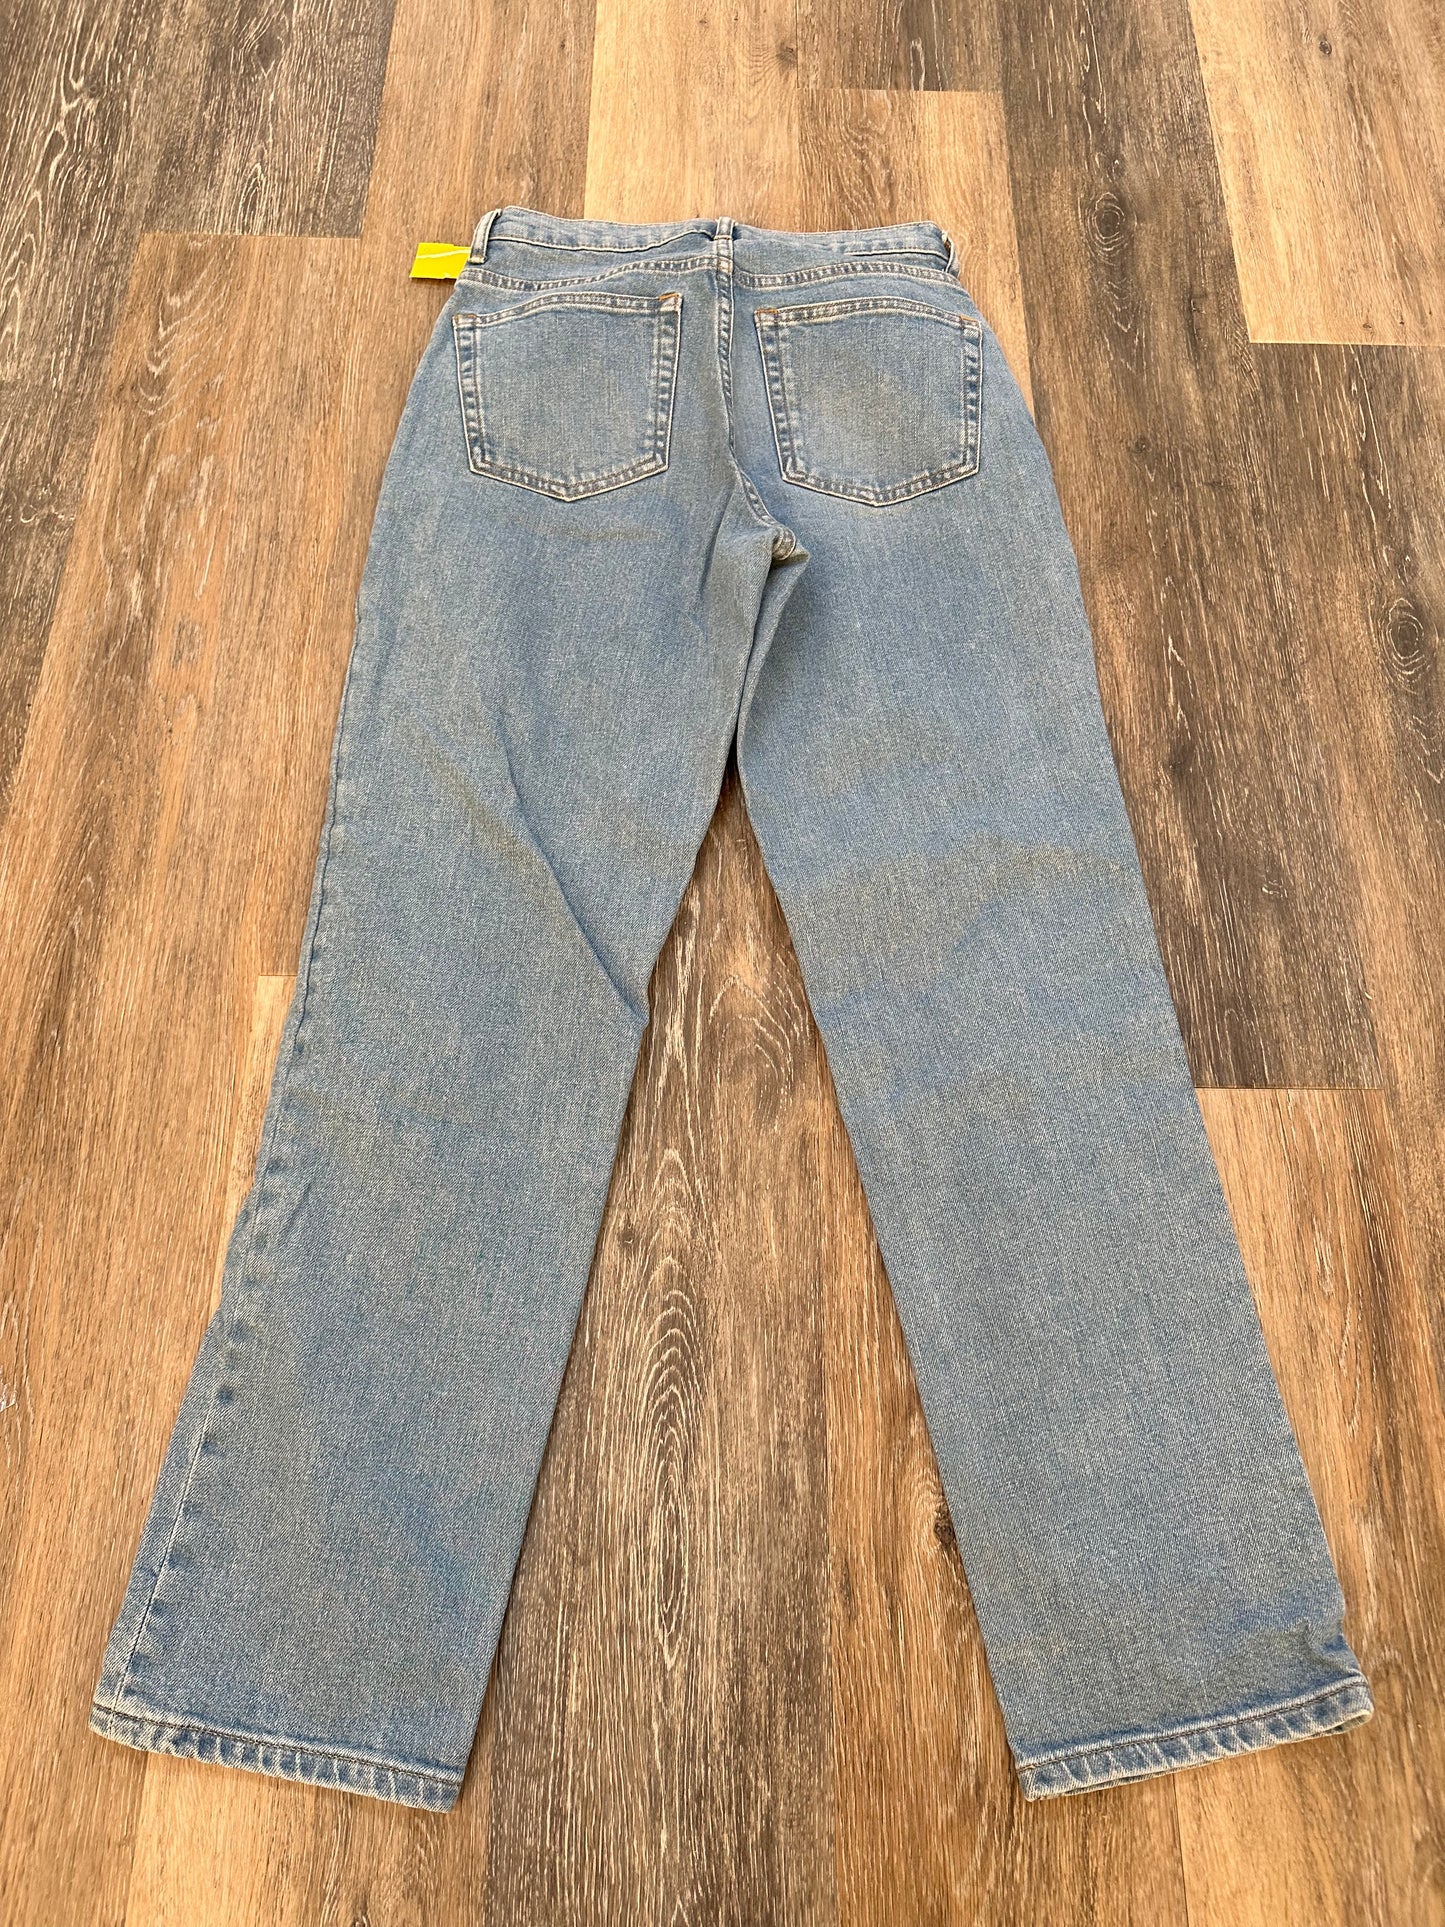 Jeans Relaxed/boyfriend By Everlane  Size: 0